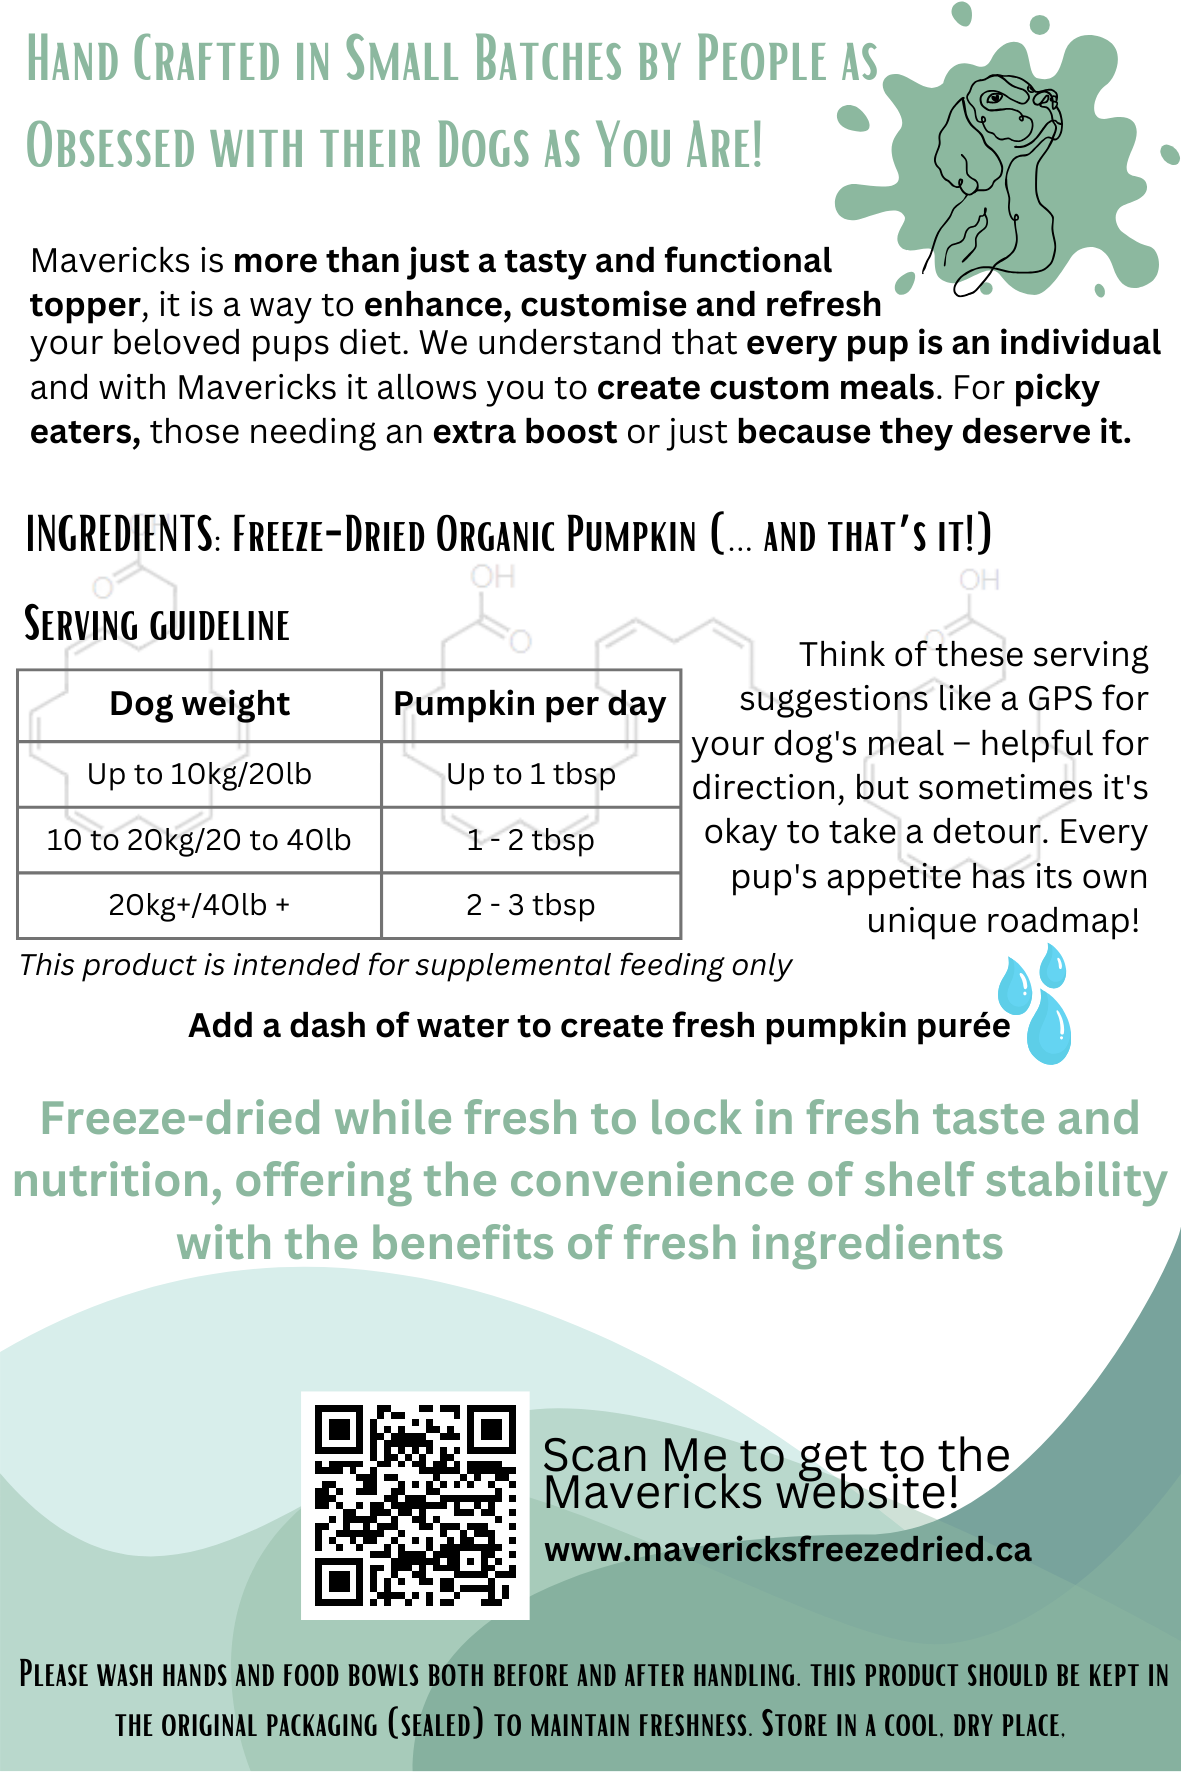 Freeze Dried Organic Pumpkin for Dogs - Gut & Stool Support Dog Food Topper